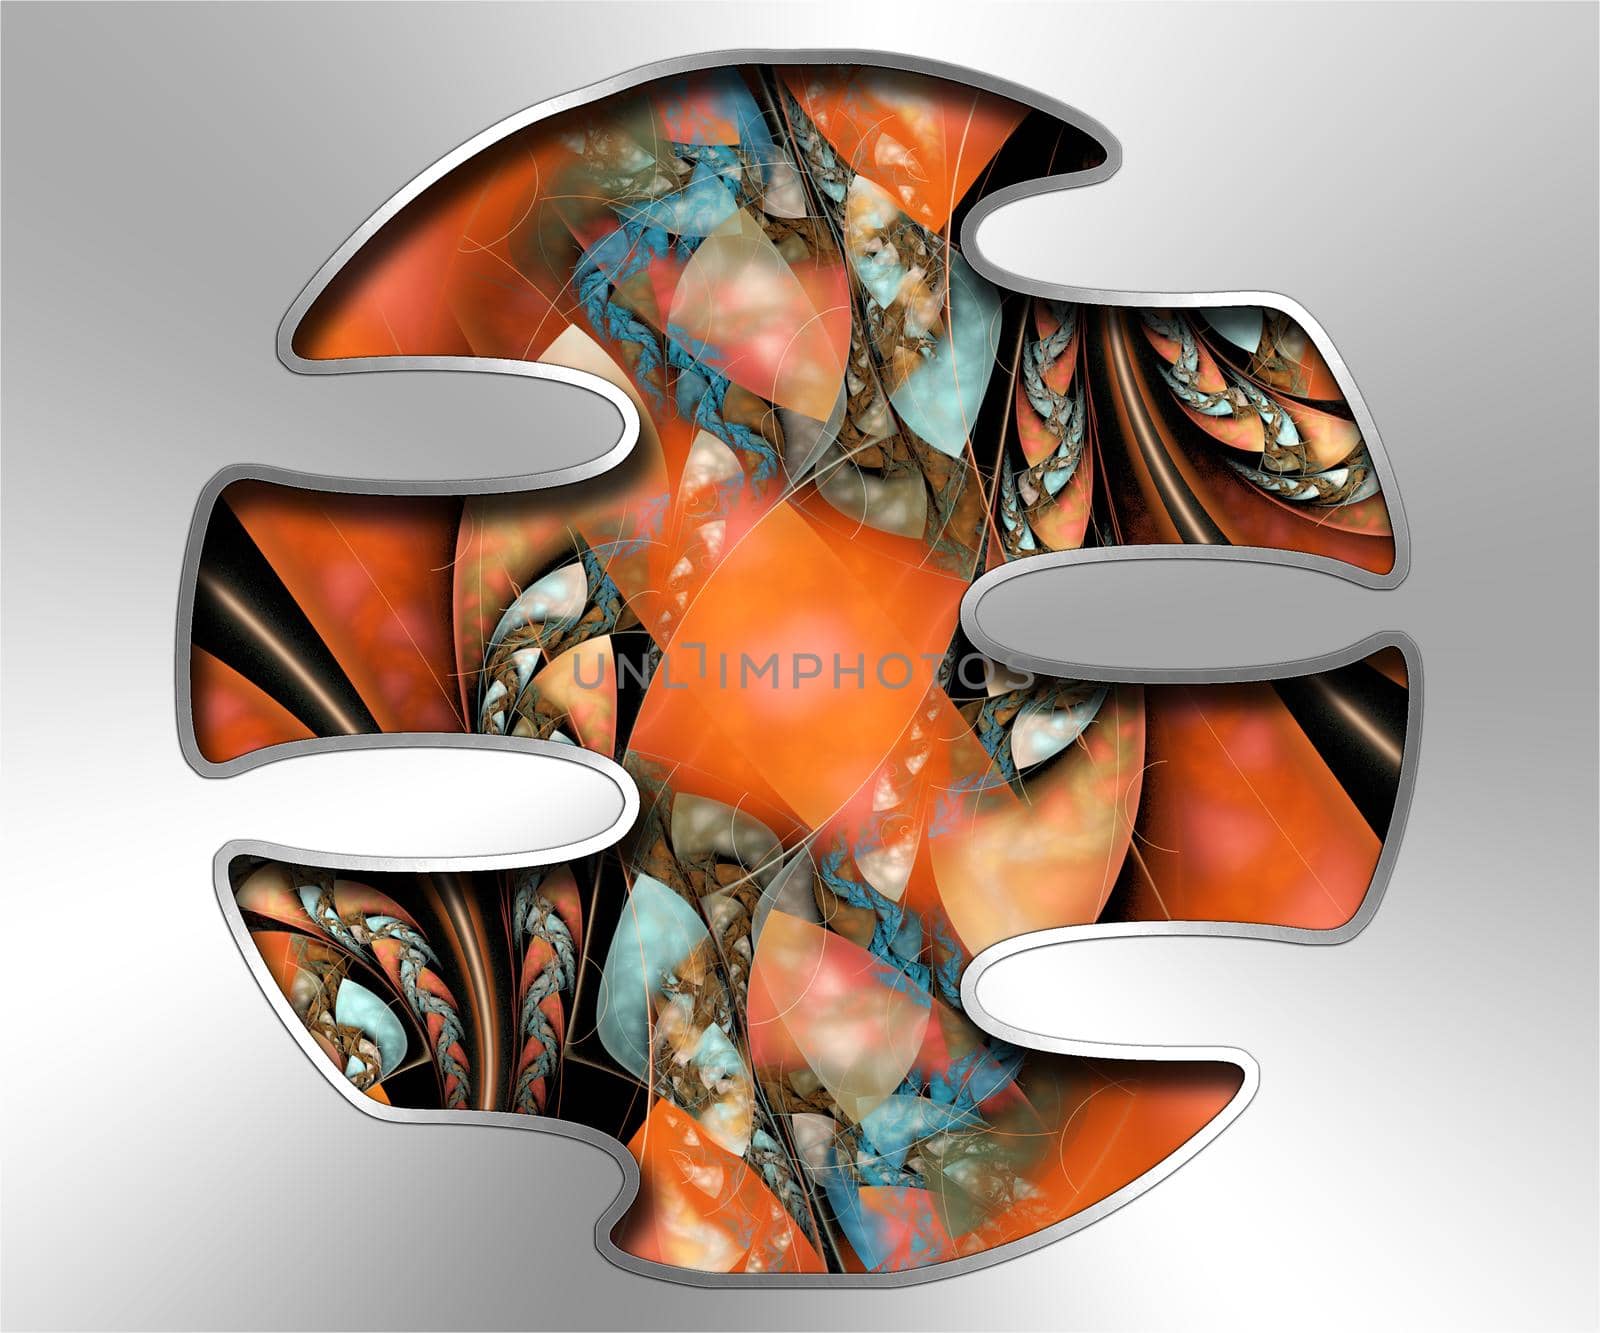 3D illustration of creative fractal artwork combined with silver embellishment by stocklady